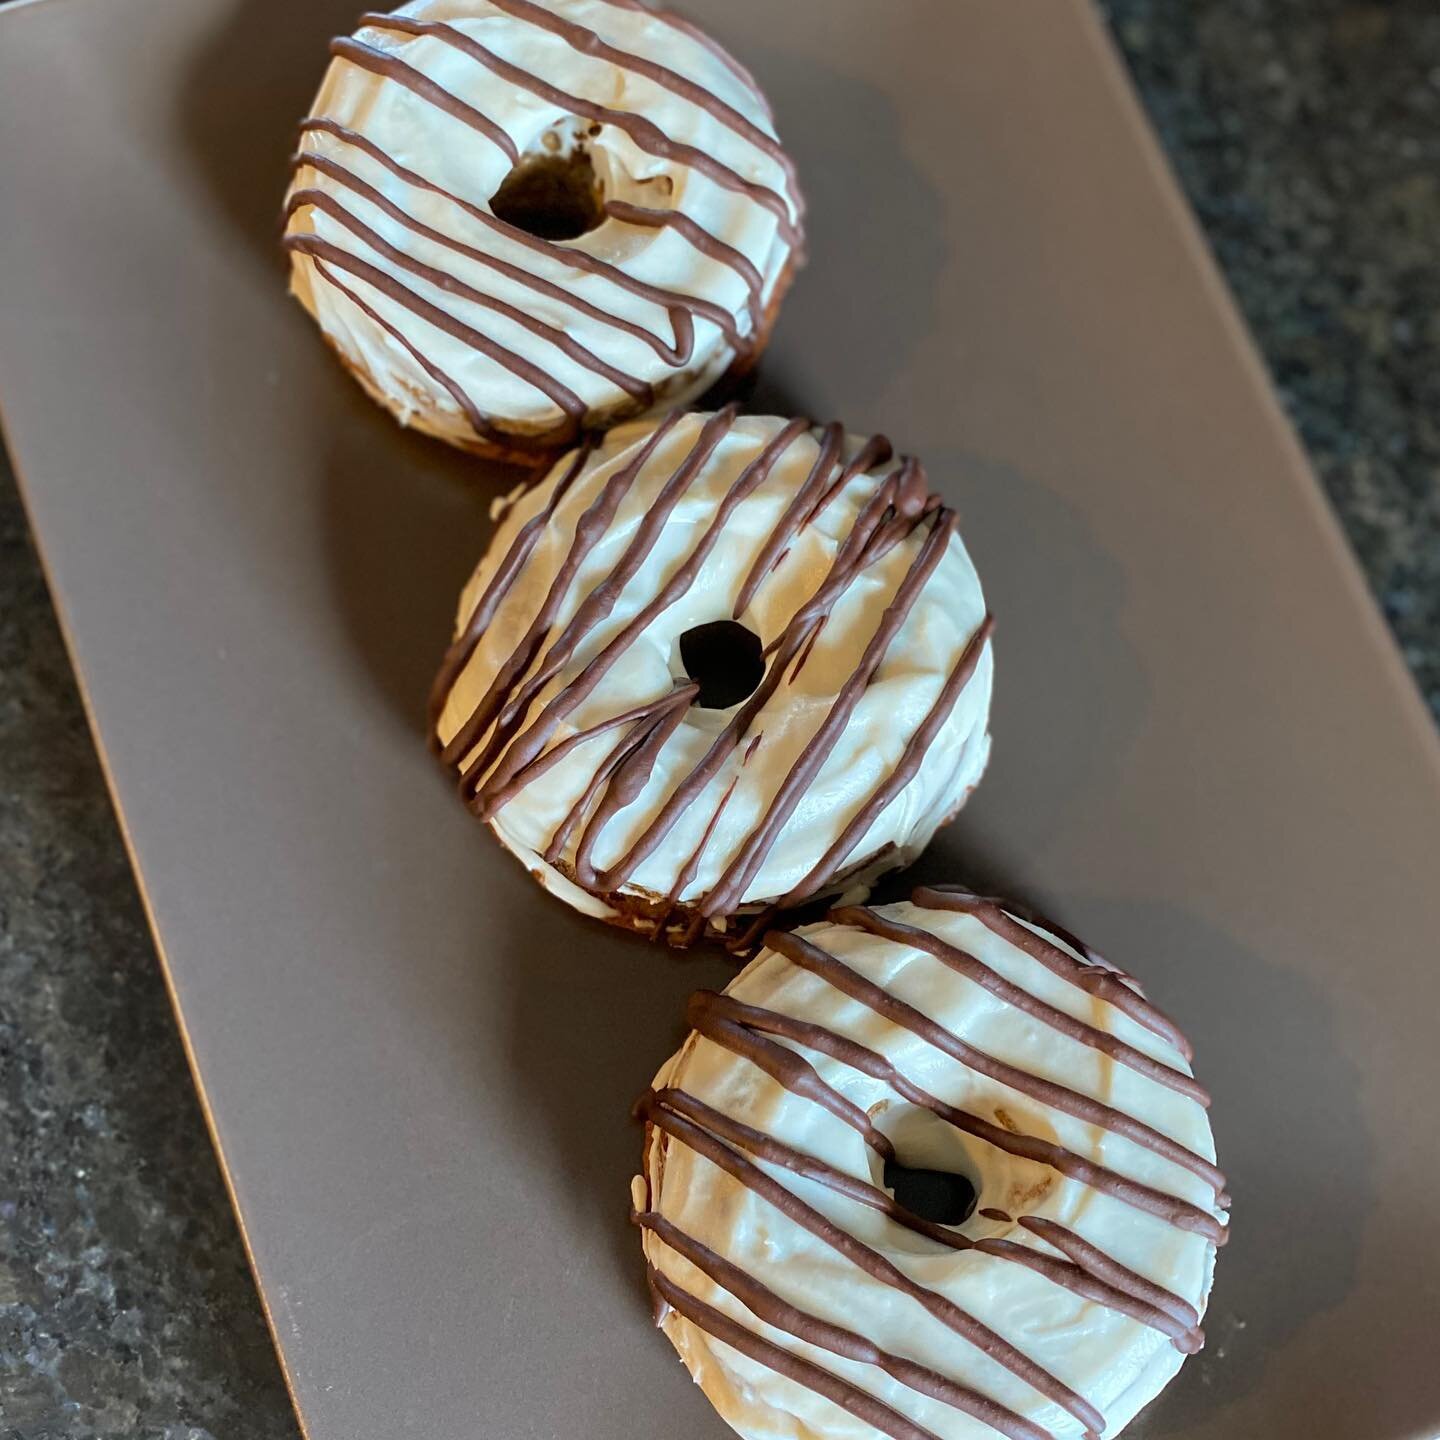 I did a thing...Pumpkin Spiced donut with cream cheese glaze and Salted caramel chocolate drizzle.❤️ #keto #ketodiet #ketogenic #ketosis #ketogenicdiet #ketolife #ketofam #ketones #lowcarb #health #weightloss #weightlosstips #ketocooking #registe